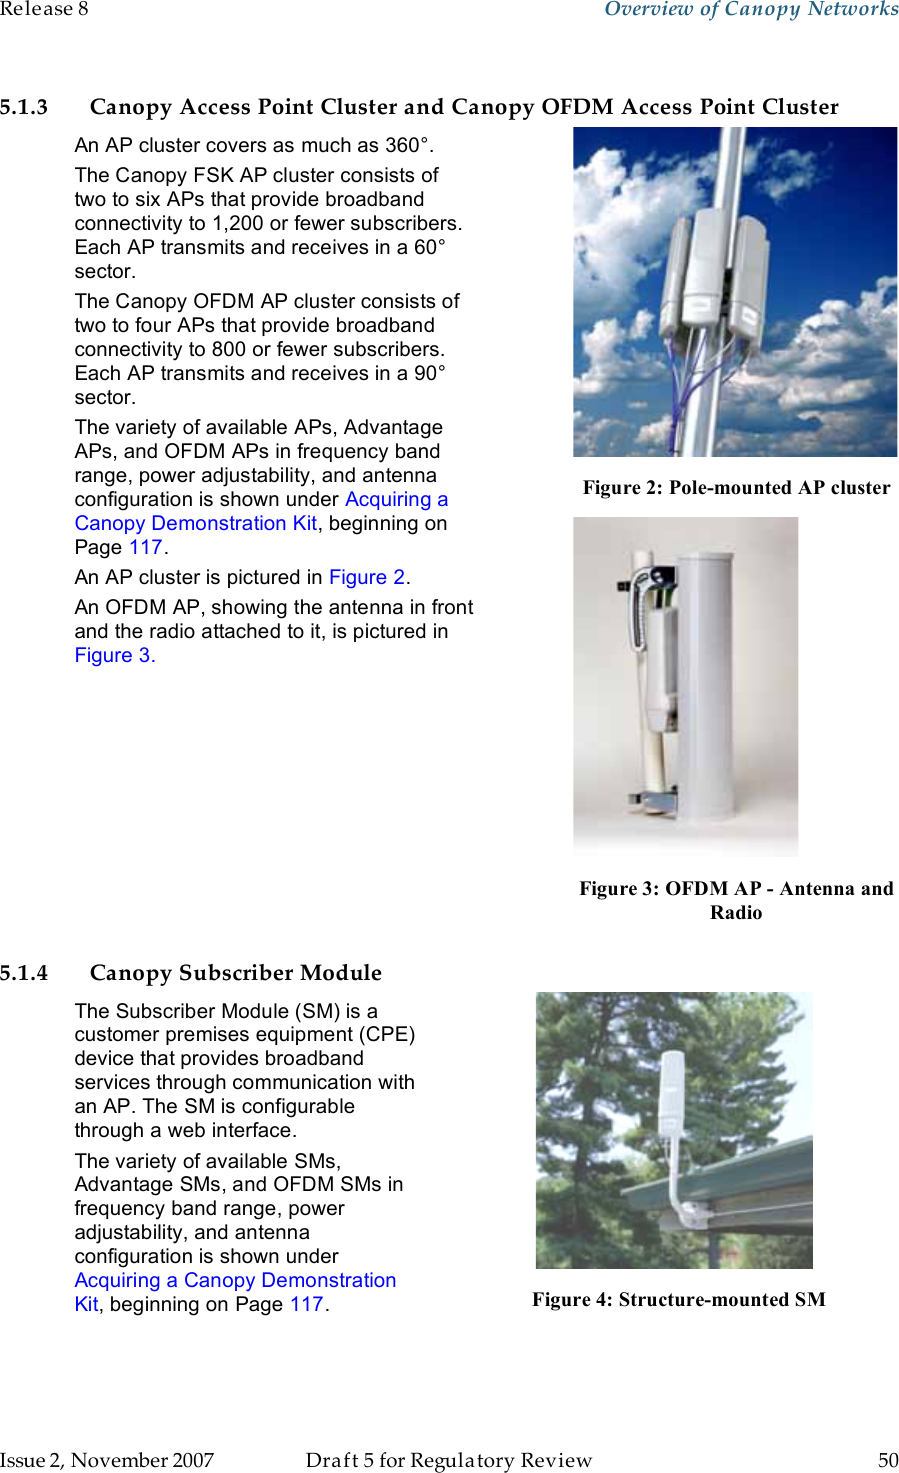 Release 8    Overview of Canopy Networks                  March 200                  Through Software Release 6.   Issue 2, November 2007  Draft 5 for Regulatory Review  50     5.1.3 Canopy Access Point Cluster and Canopy OFDM Access Point Cluster  Figure 2: Pole-mounted AP cluster An AP cluster covers as much as 360°.  The Canopy FSK AP cluster consists of two to six APs that provide broadband connectivity to 1,200 or fewer subscribers. Each AP transmits and receives in a 60° sector.  The Canopy OFDM AP cluster consists of two to four APs that provide broadband connectivity to 800 or fewer subscribers. Each AP transmits and receives in a 90° sector. The variety of available APs, Advantage APs, and OFDM APs in frequency band range, power adjustability, and antenna configuration is shown under Acquiring a Canopy Demonstration Kit, beginning on Page 117. An AP cluster is pictured in Figure 2. An OFDM AP, showing the antenna in front and the radio attached to it, is pictured in Figure 3.  Figure 3: OFDM AP - Antenna and Radio 5.1.4 Canopy Subscriber Module The Subscriber Module (SM) is a customer premises equipment (CPE) device that provides broadband services through communication with an AP. The SM is configurable through a web interface. The variety of available SMs, Advantage SMs, and OFDM SMs in frequency band range, power adjustability, and antenna configuration is shown under Acquiring a Canopy Demonstration Kit, beginning on Page 117.    Figure 4: Structure-mounted SM 